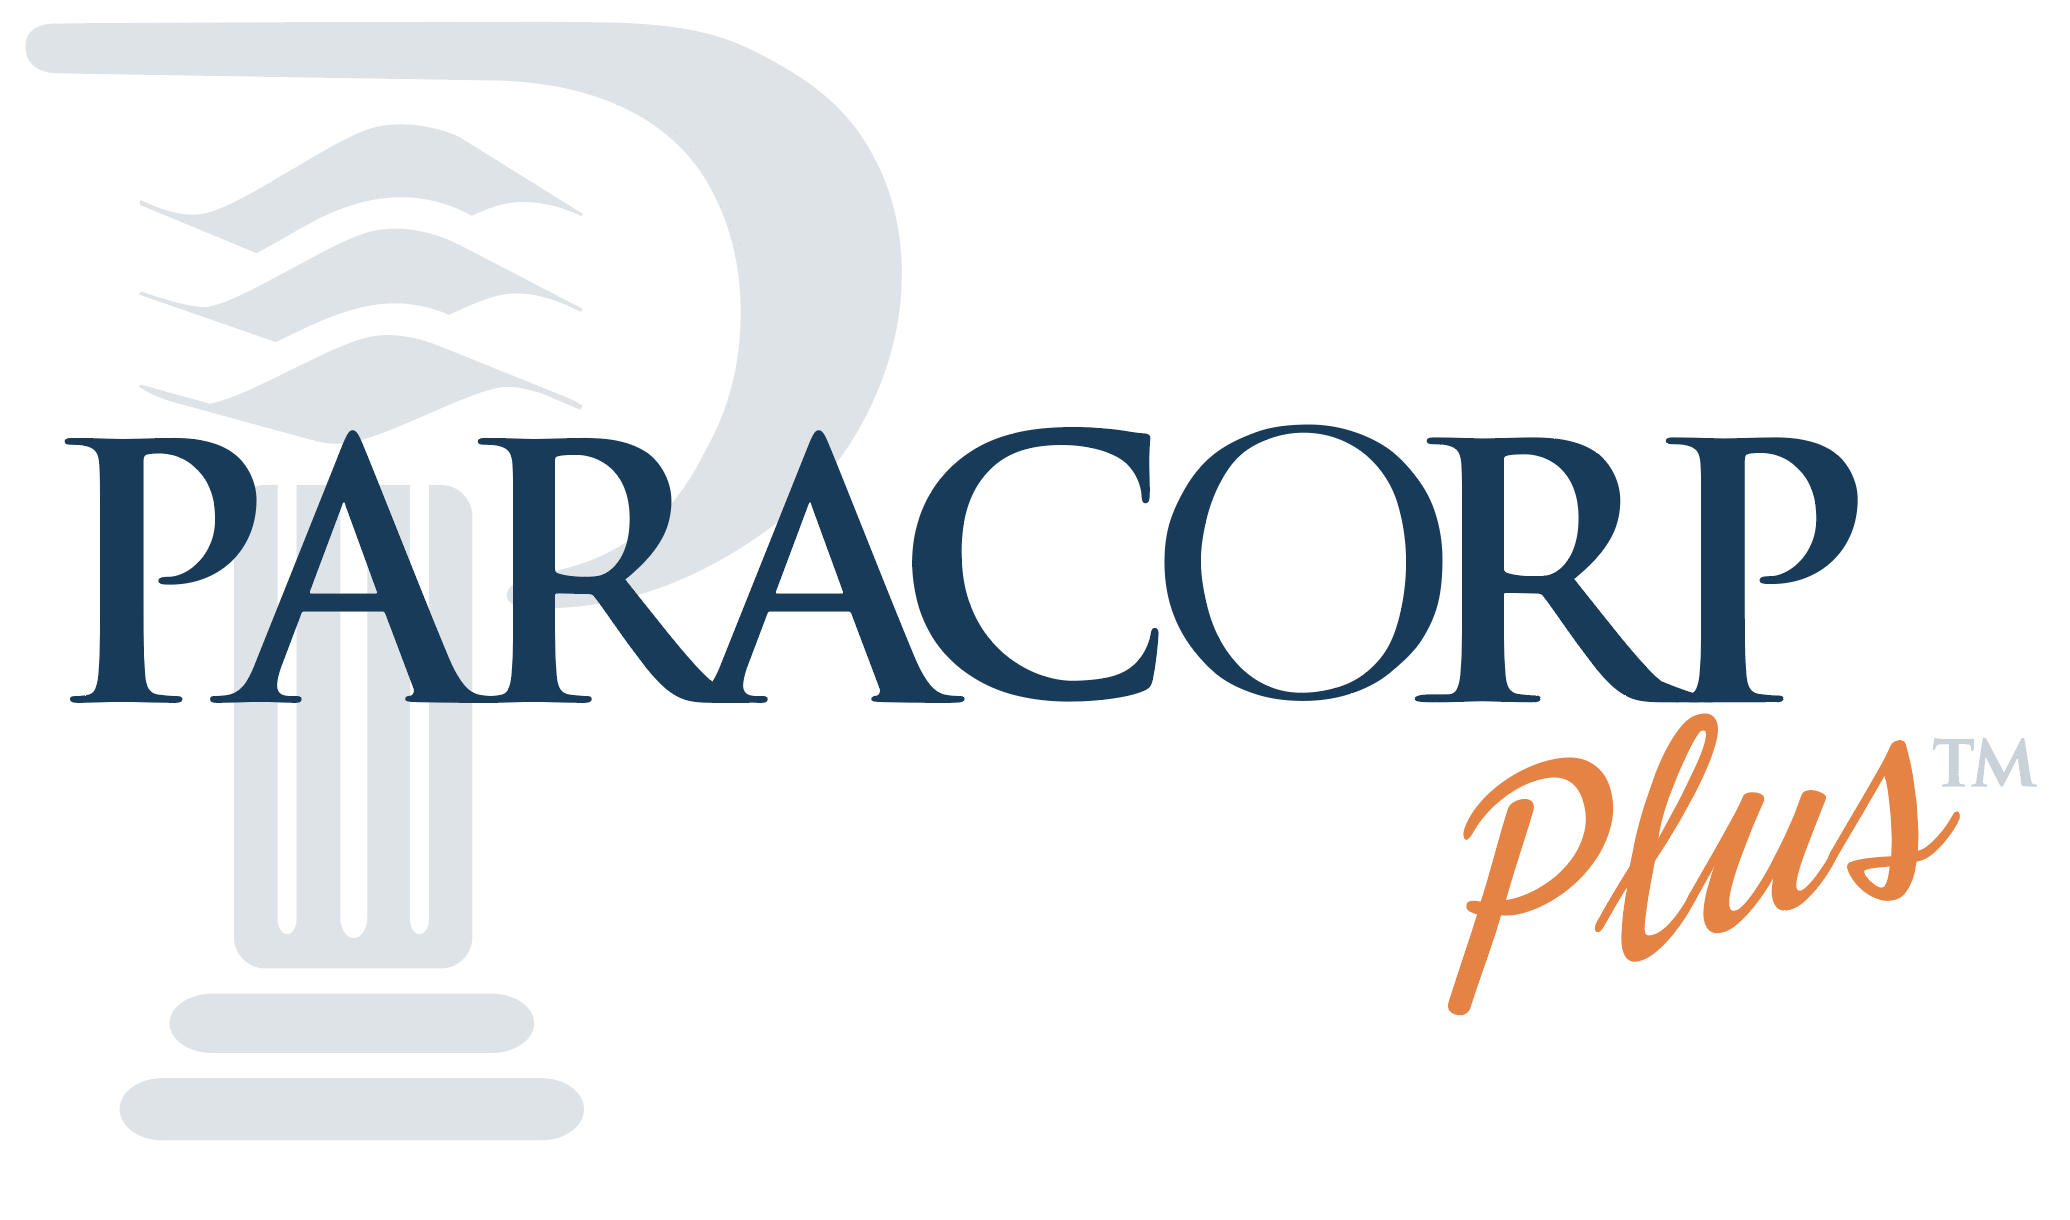 ParacorpPlus – Online Access to Entities